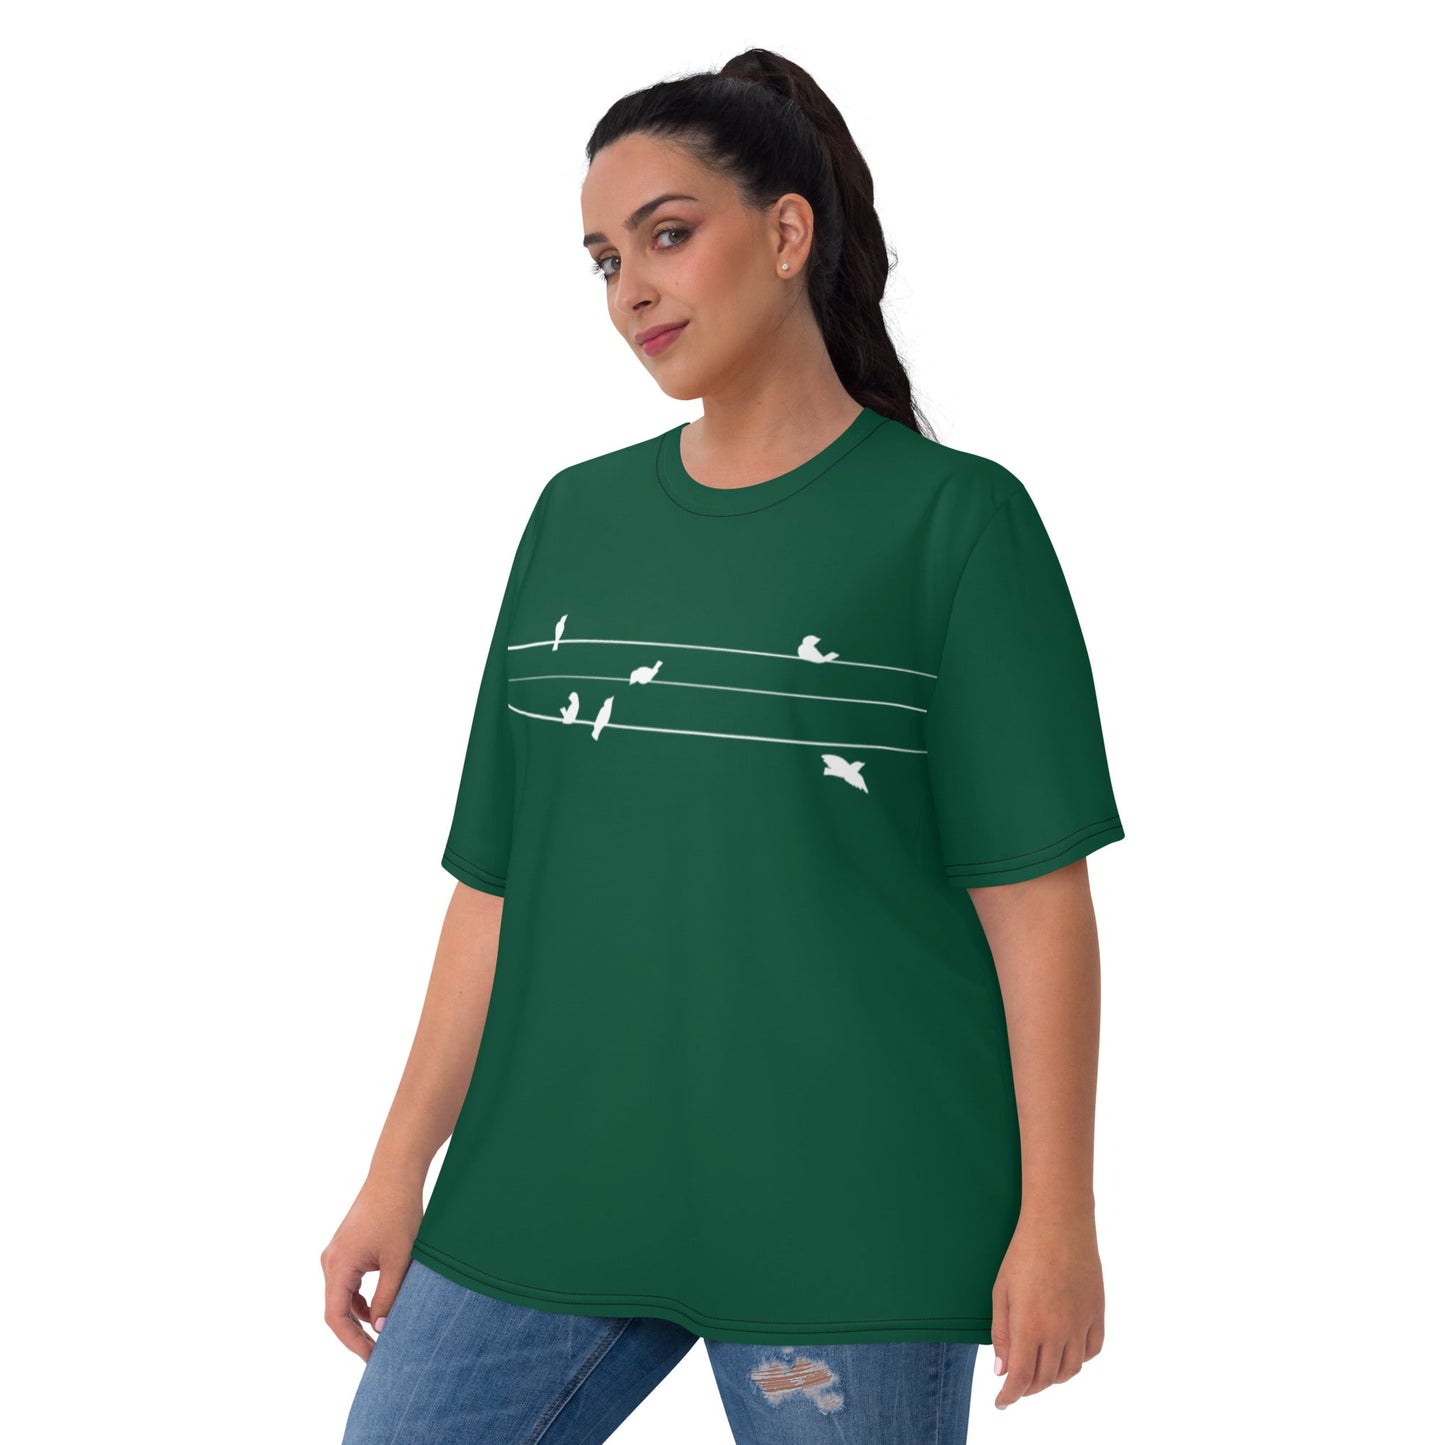 FLY ON THE WALL Women's T-shirt - Bonotee